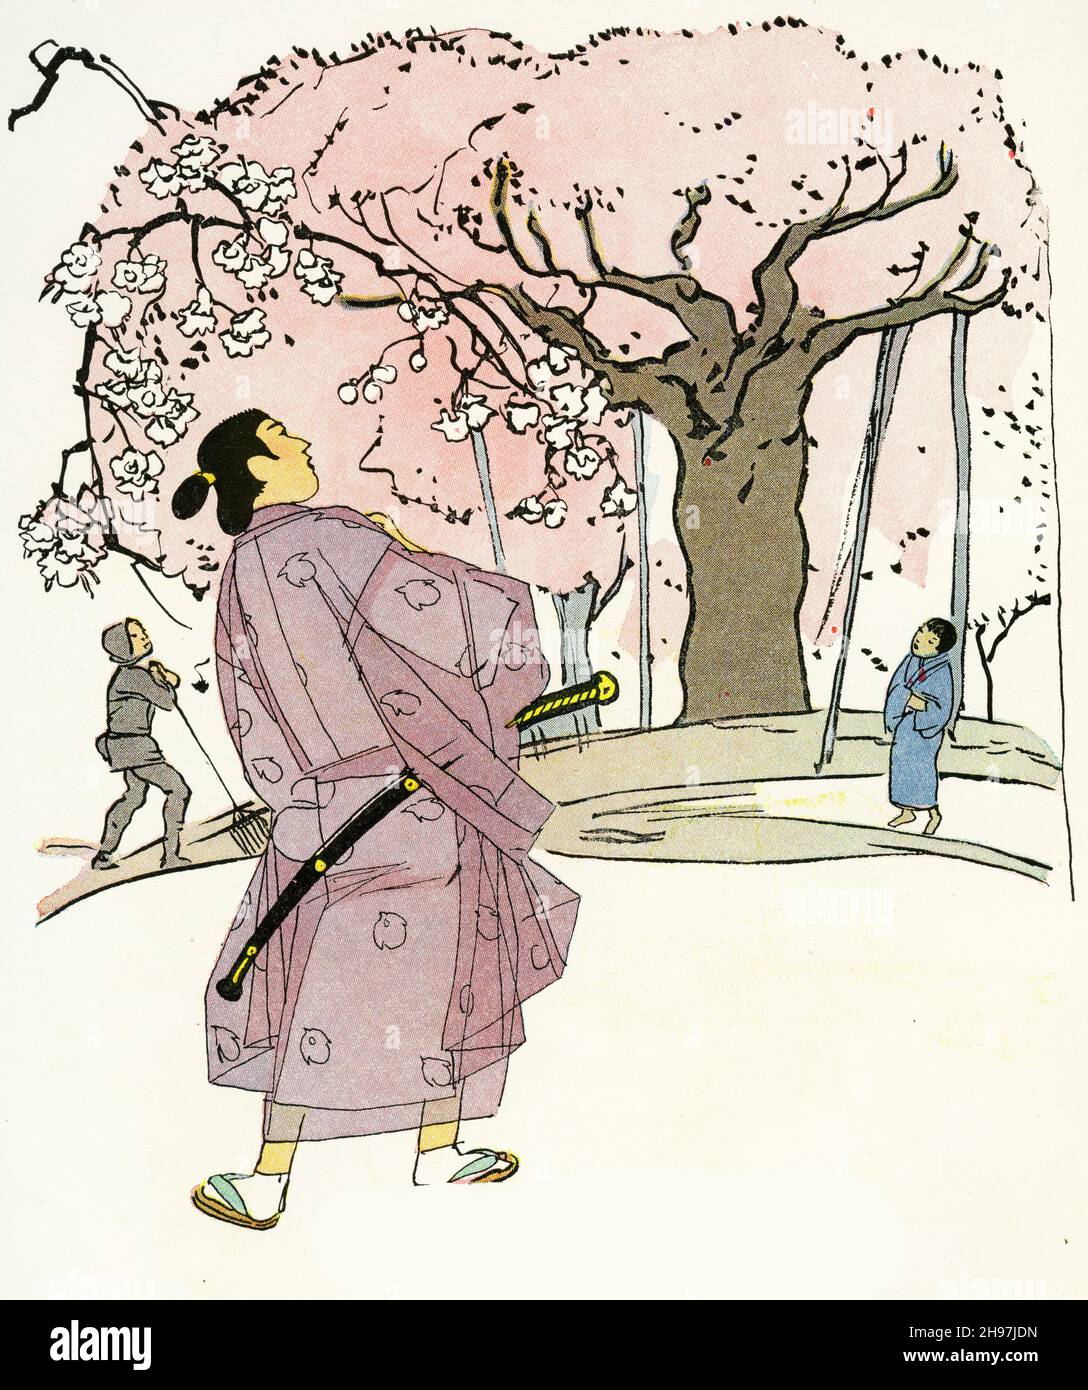 Quaint illustration of tradiitonal life in Japan, with a samurai warrior admiring the cherry blossoms in spring; published circa 1928 Stock Photo